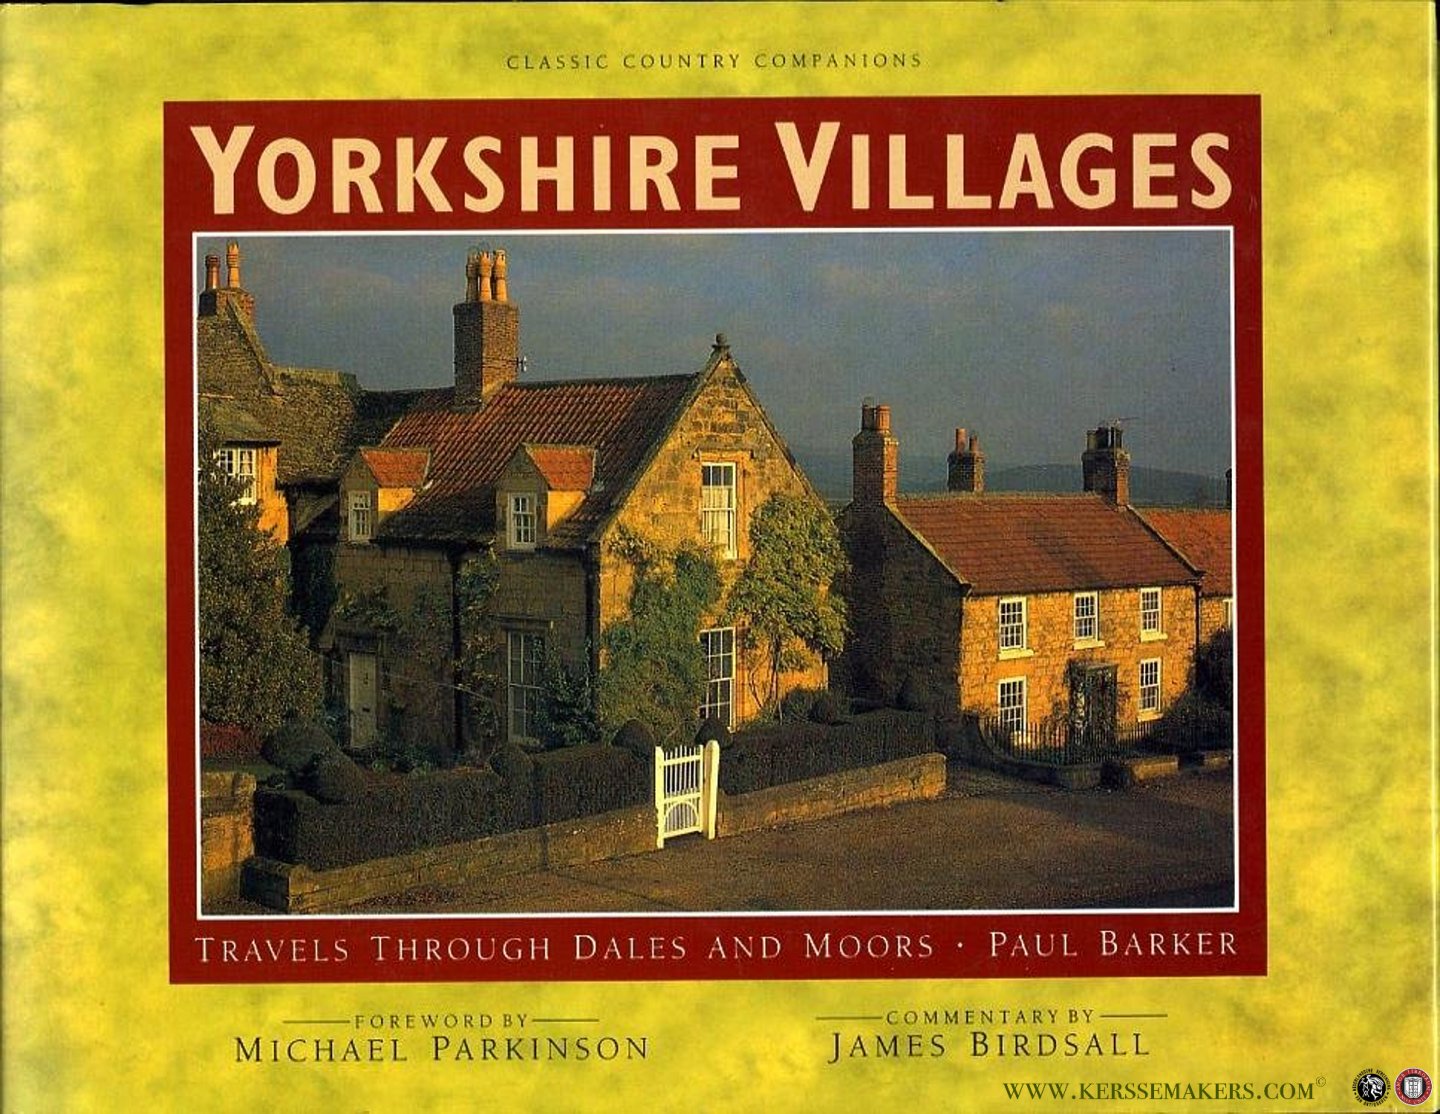 BIRDSALL, James / PARKINSON, Michael - Yorkshire Villages. Travels Through Dales and Moors. (HARDCOVER)